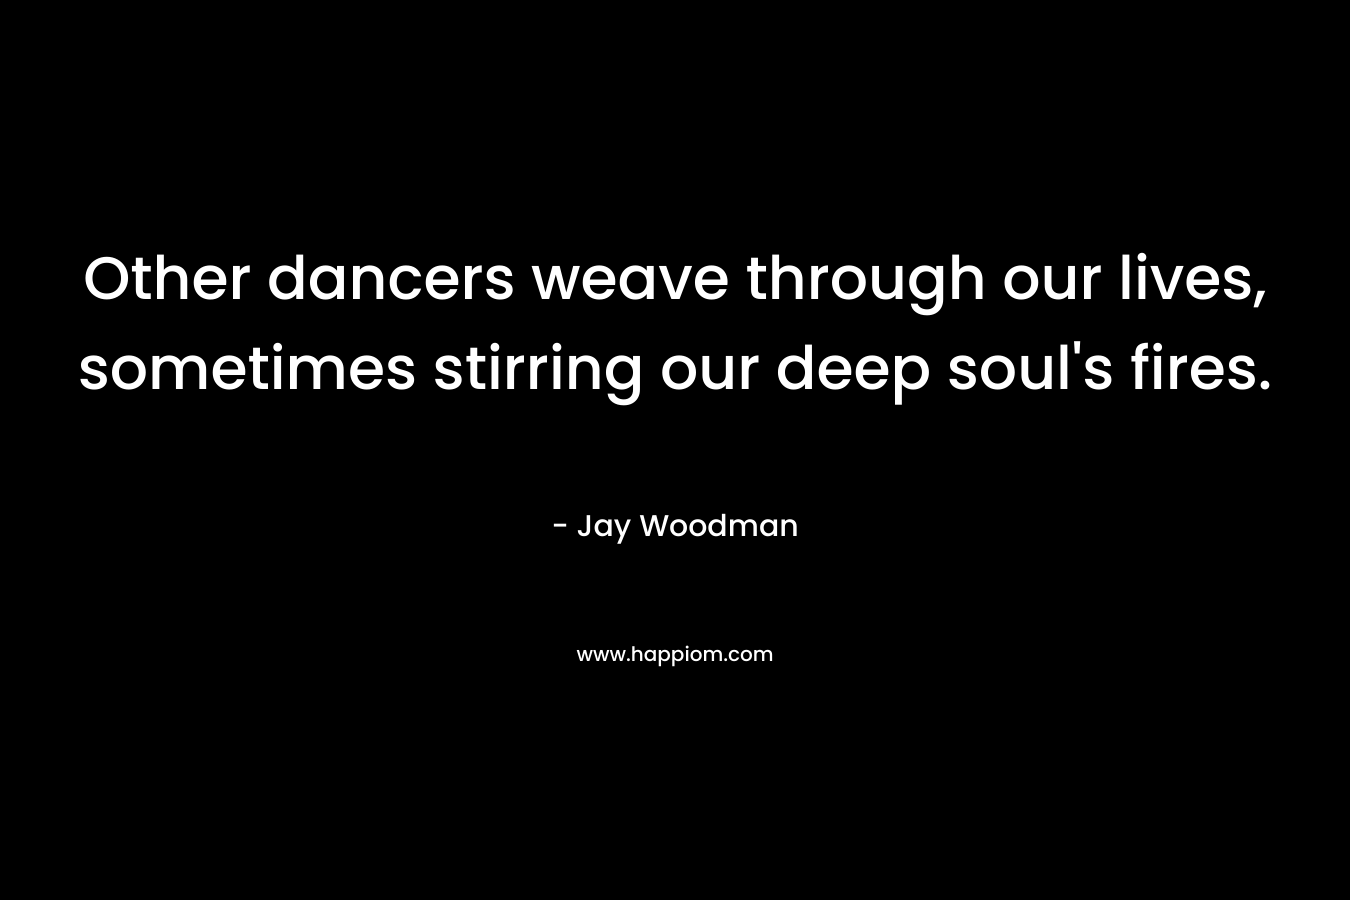 Other dancers weave through our lives, sometimes stirring our deep soul's fires.